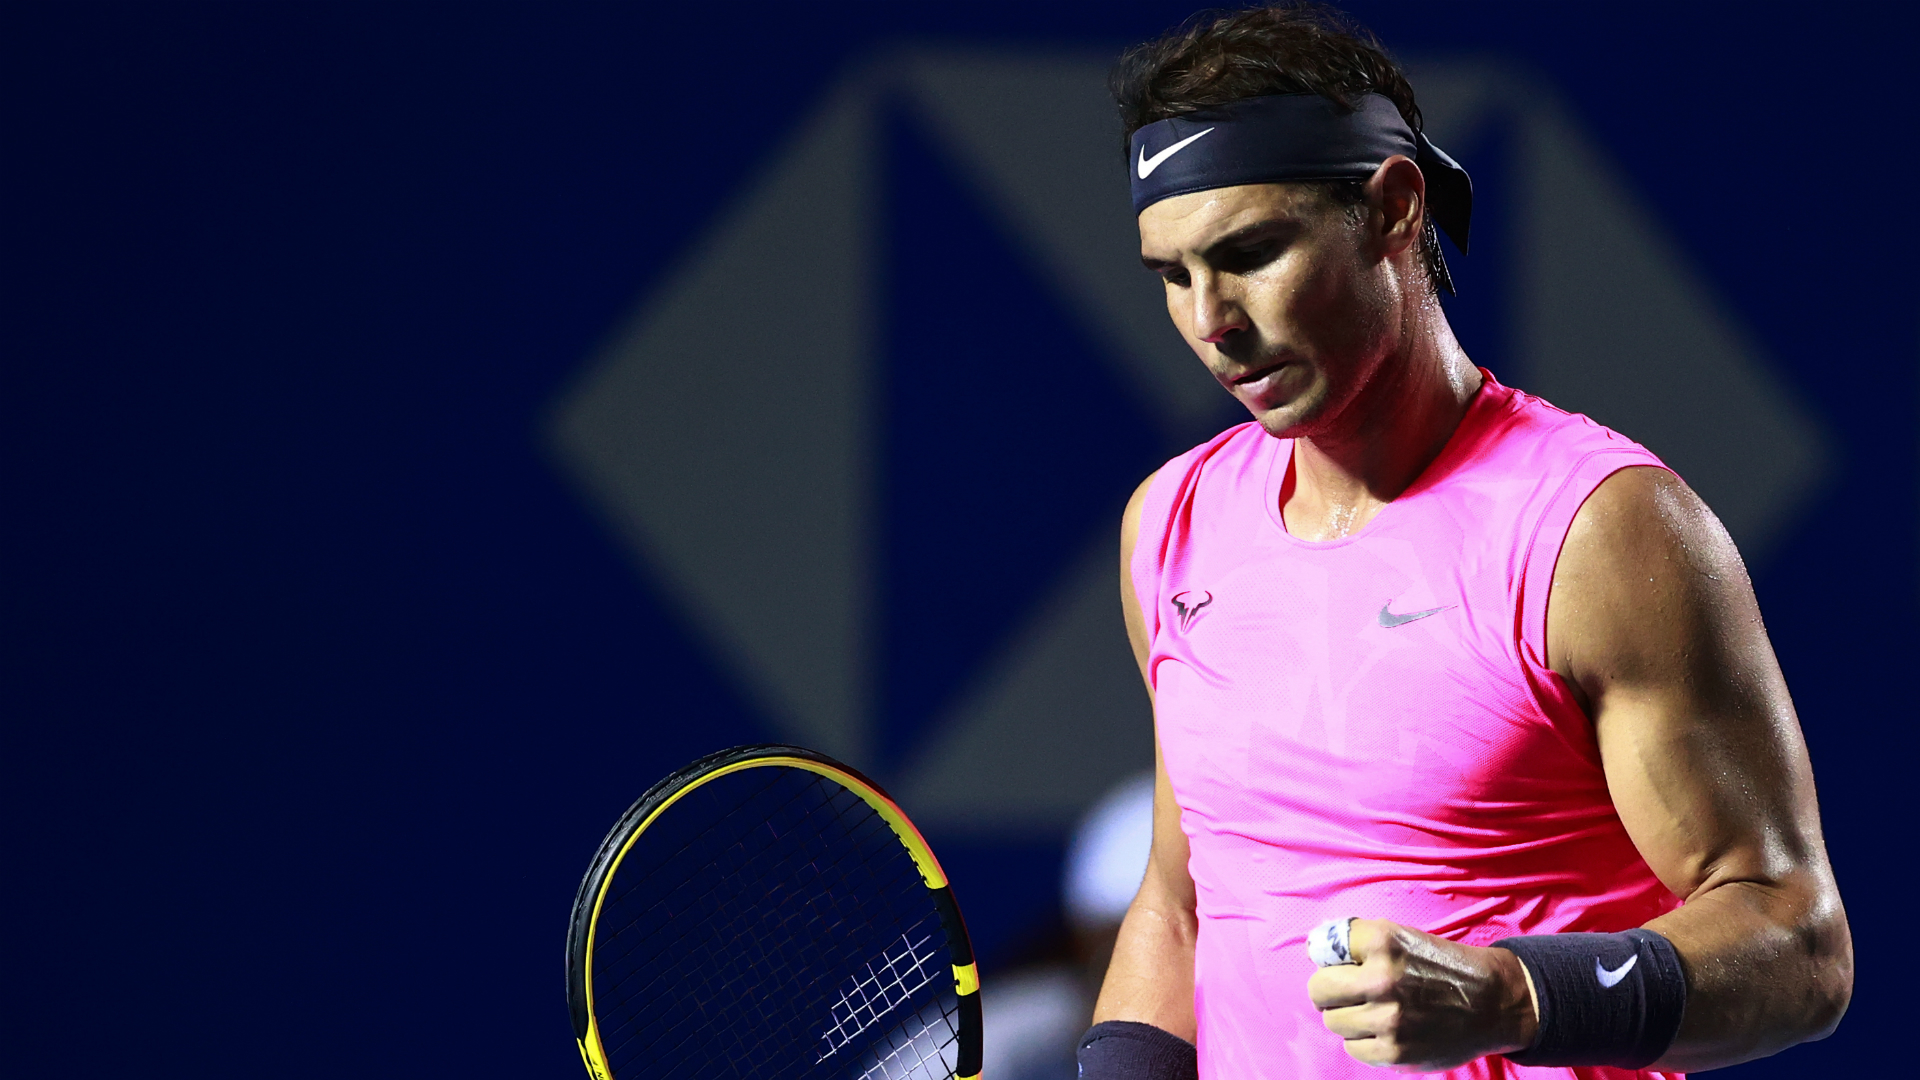 Top seed Rafael Nadal was too good for Grigor Dimitrov en route to his fourth Mexican Open decider, triumphing 6-3 6-2.